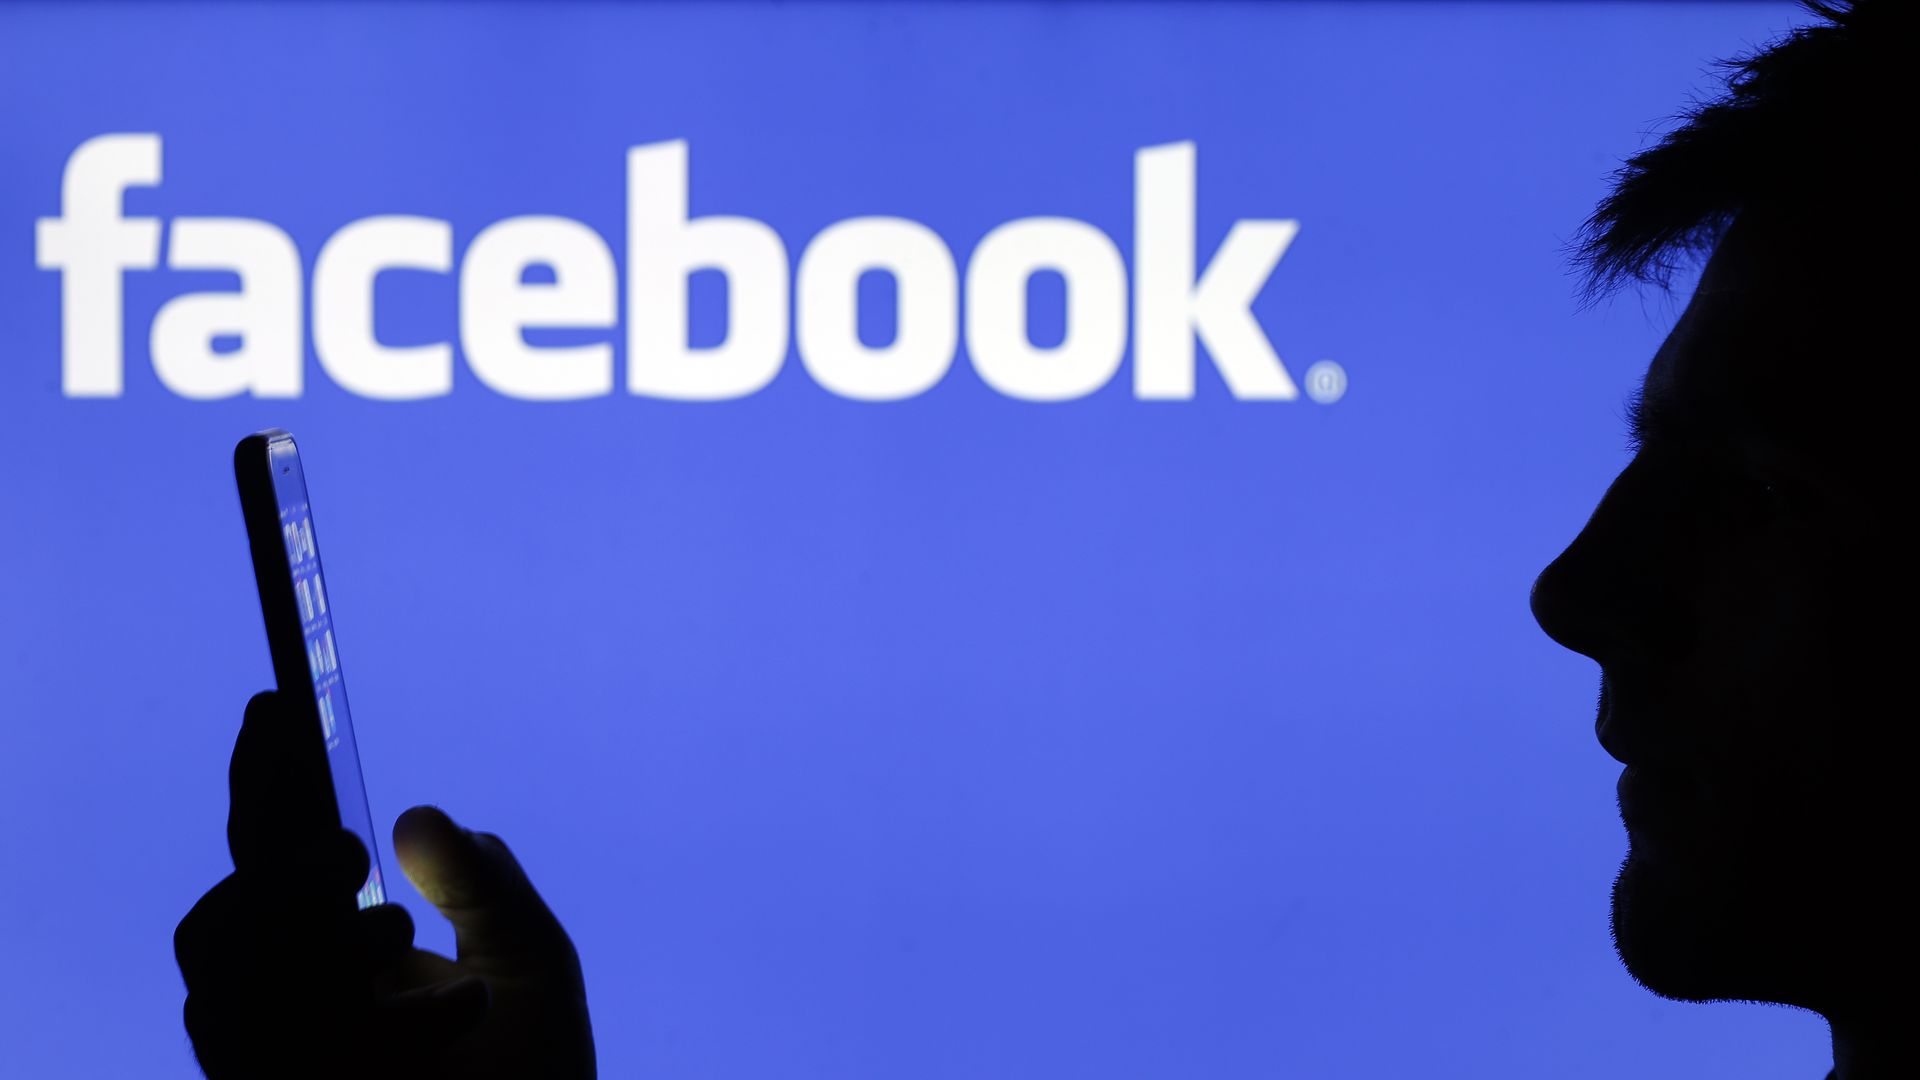 A caricature of a man holds a phone with the facebook logo in the background.